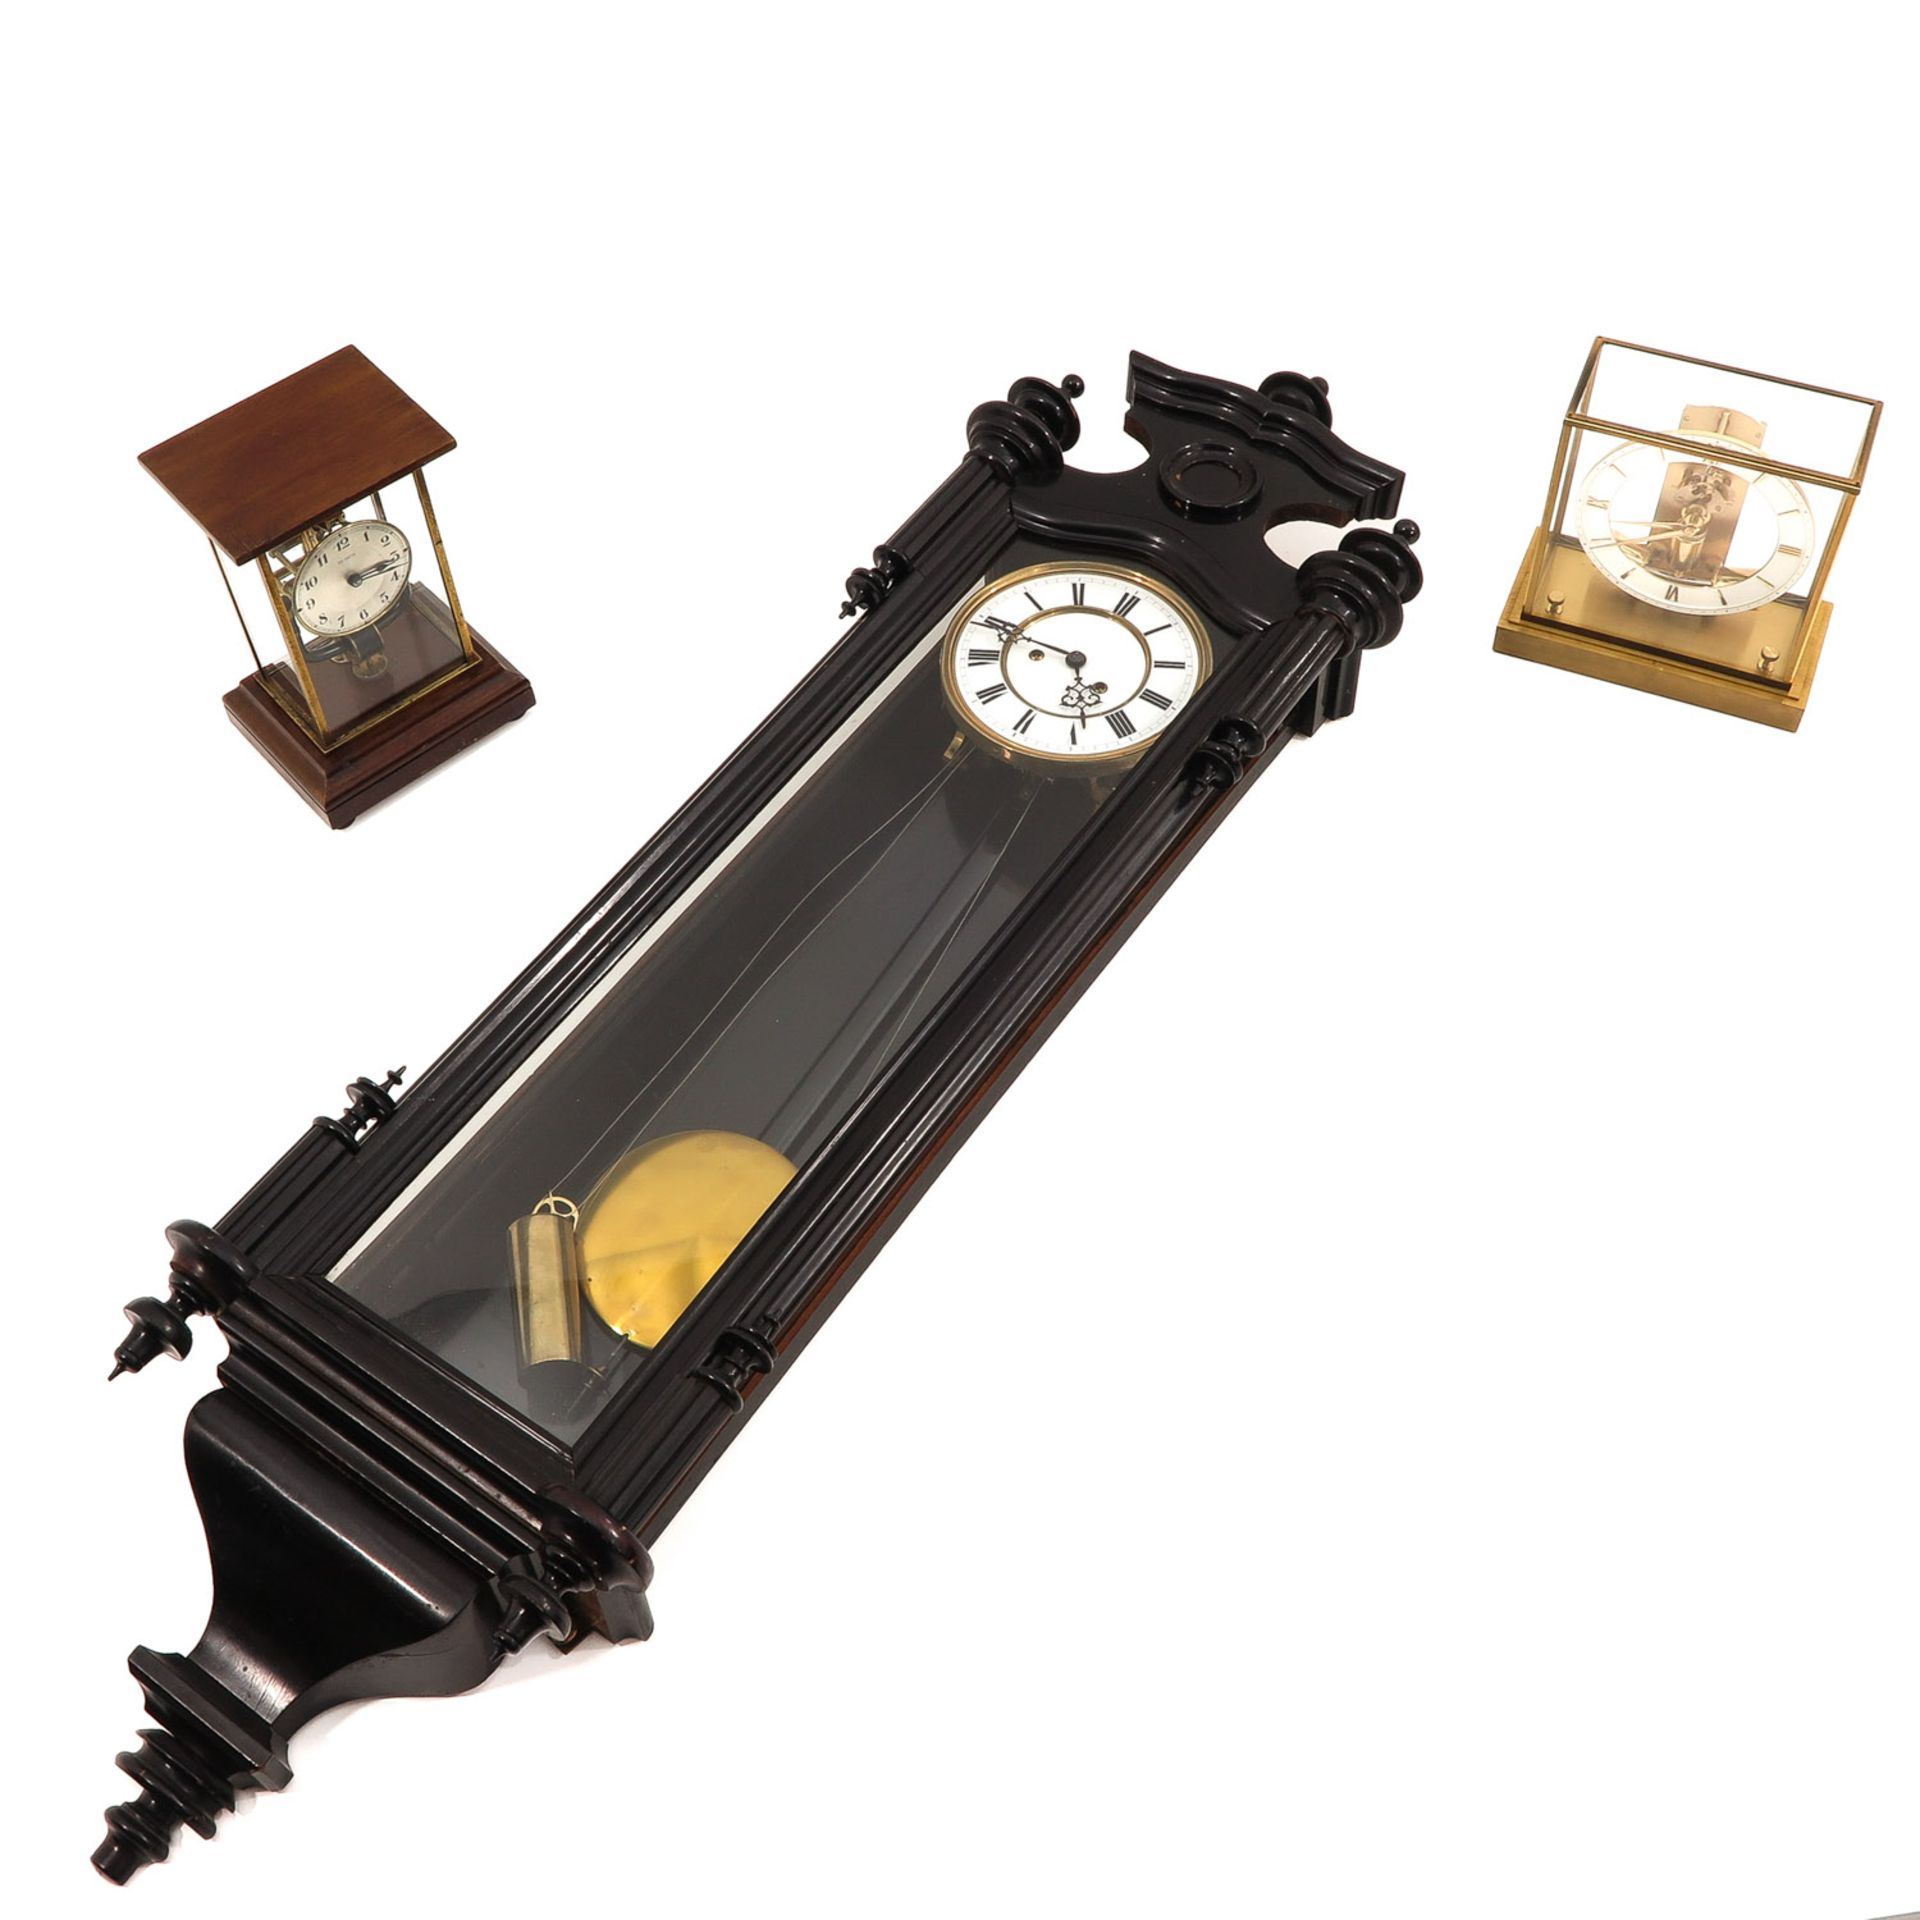 A Collection of 3 Clocks